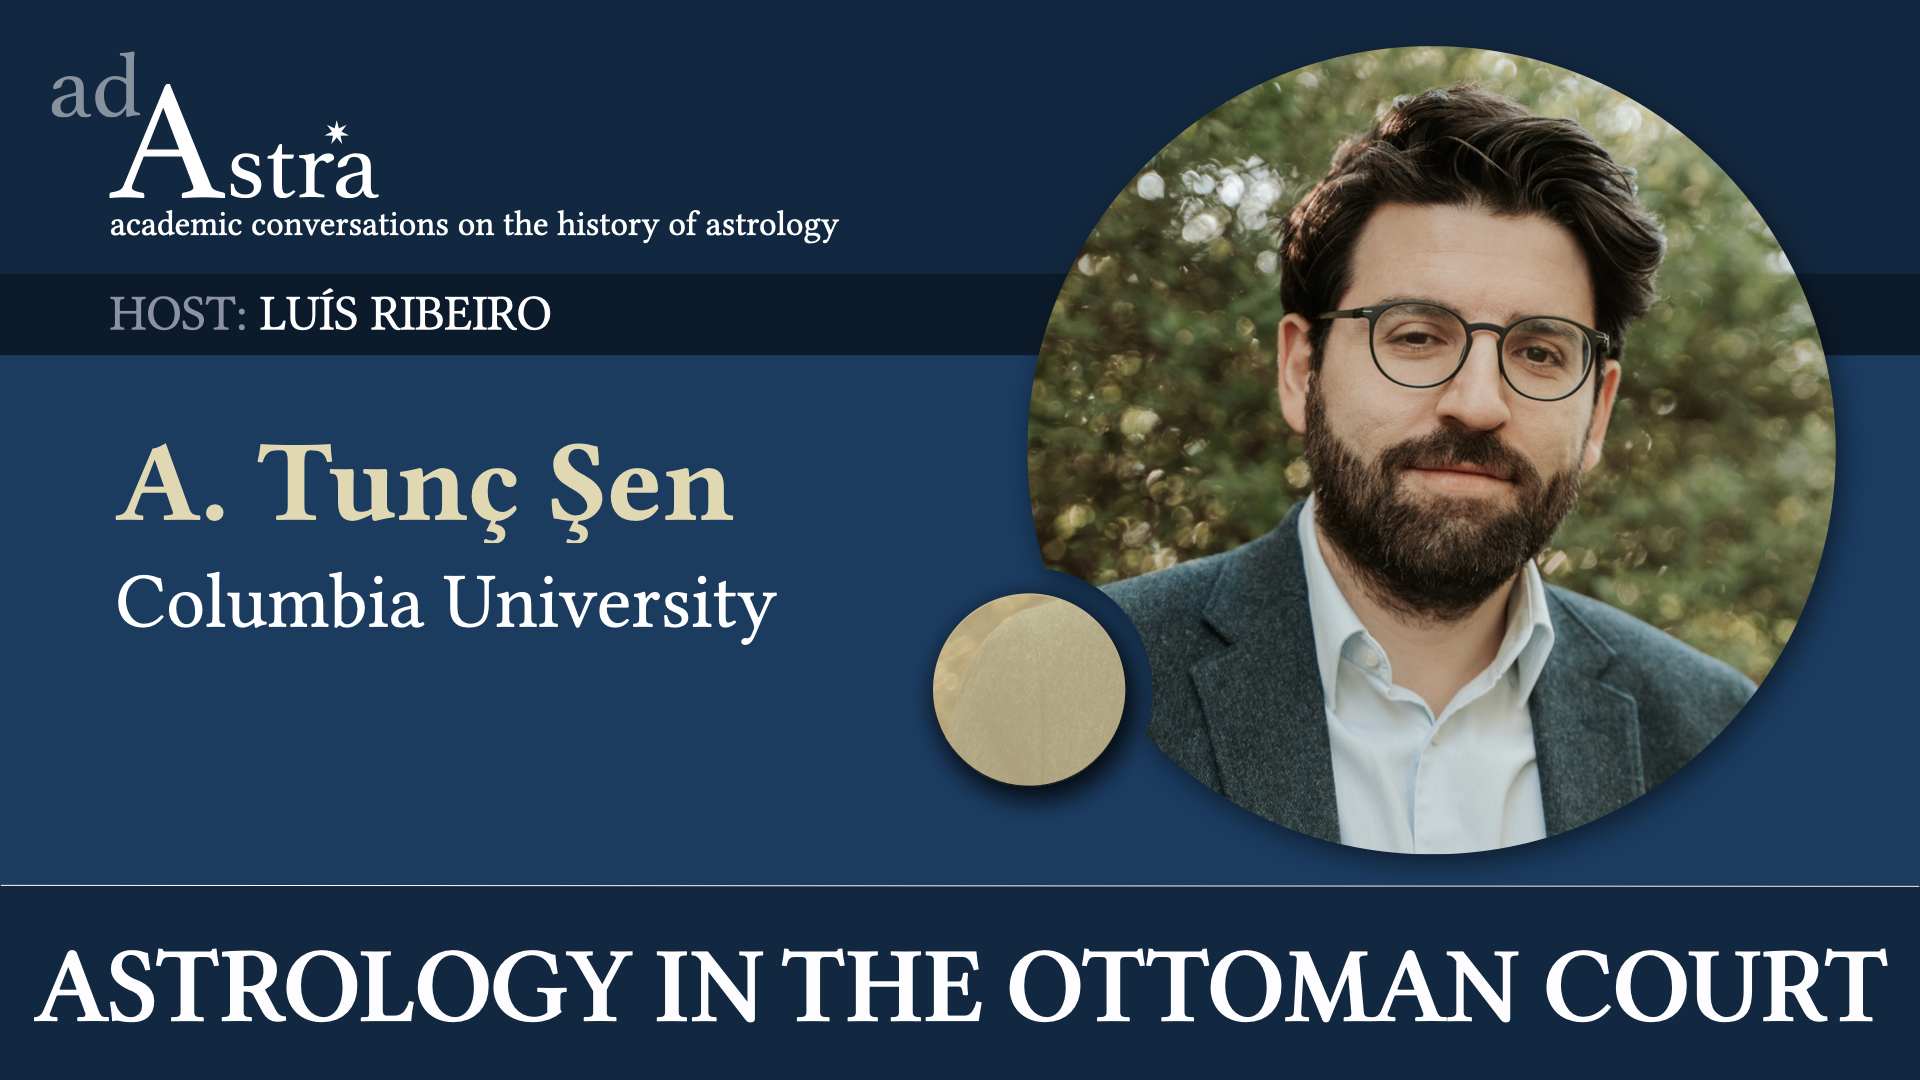 Astrology in the Ottoman court with A. Tunç Sen